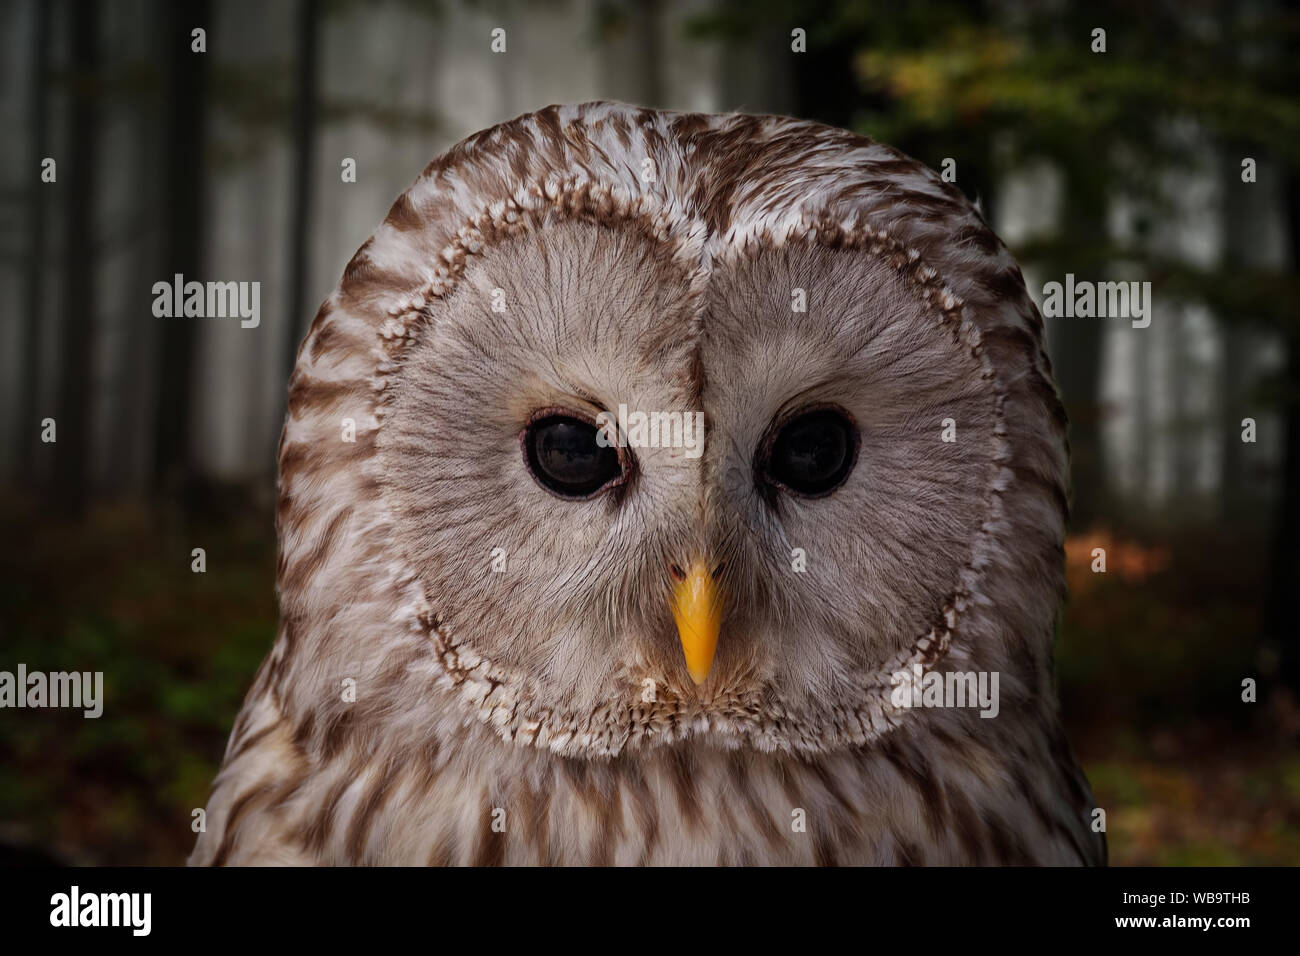 Owl, close up portrait in dark forest. Wlidlife concept. Stock Photo